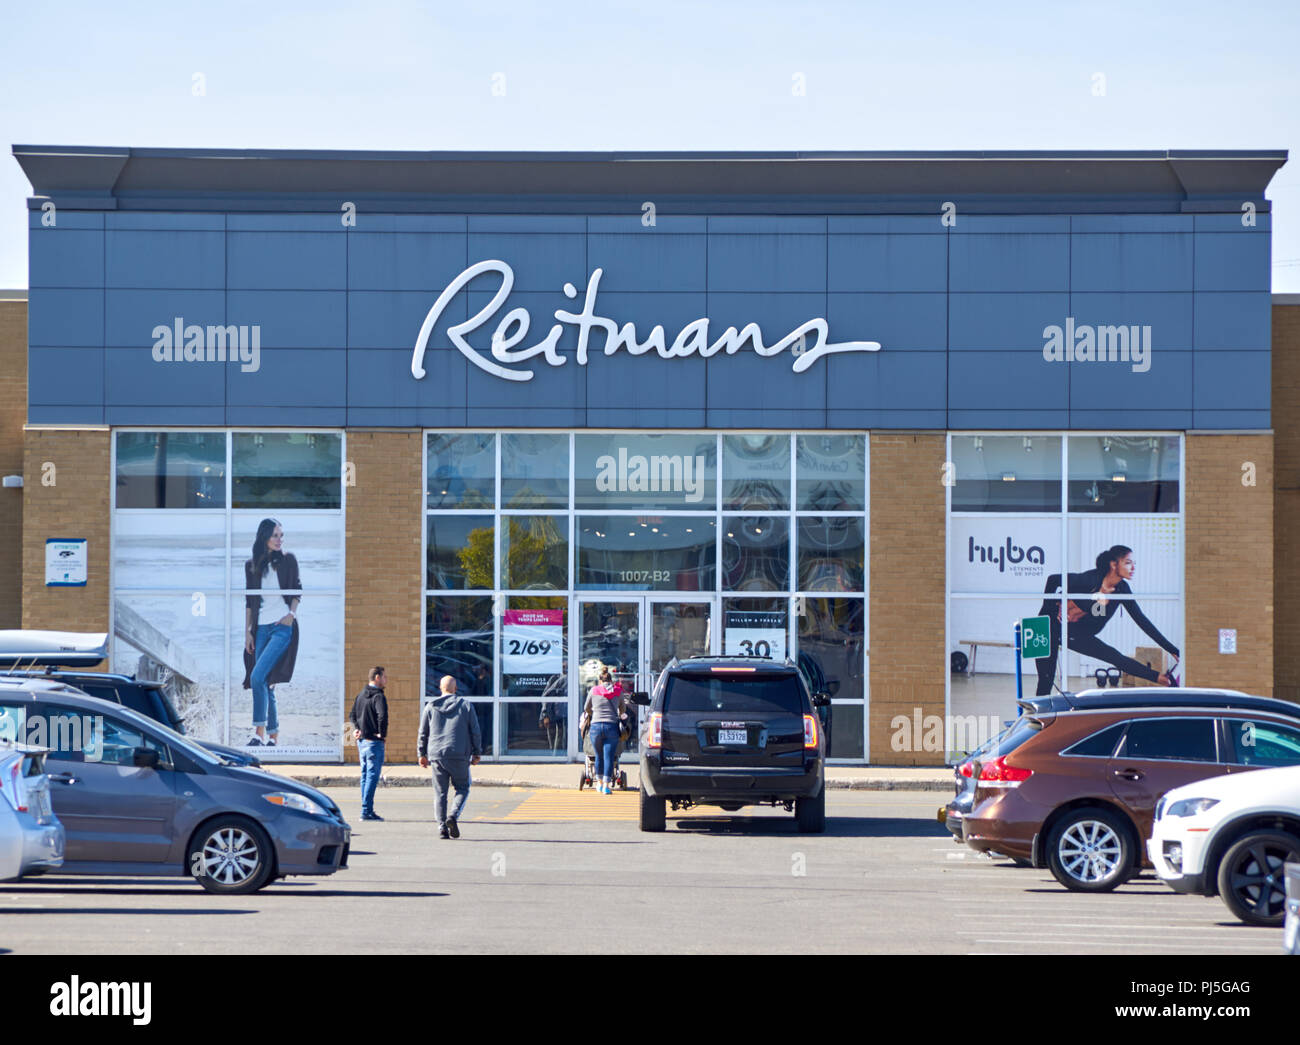 https://c8.alamy.com/comp/PJ5GAG/montreal-canada-august-28-2018-reitmans-boutique-in-montreal-reitmans-ltd-is-a-canadian-retailing-company-specializing-in-womens-clothing-it-PJ5GAG.jpg